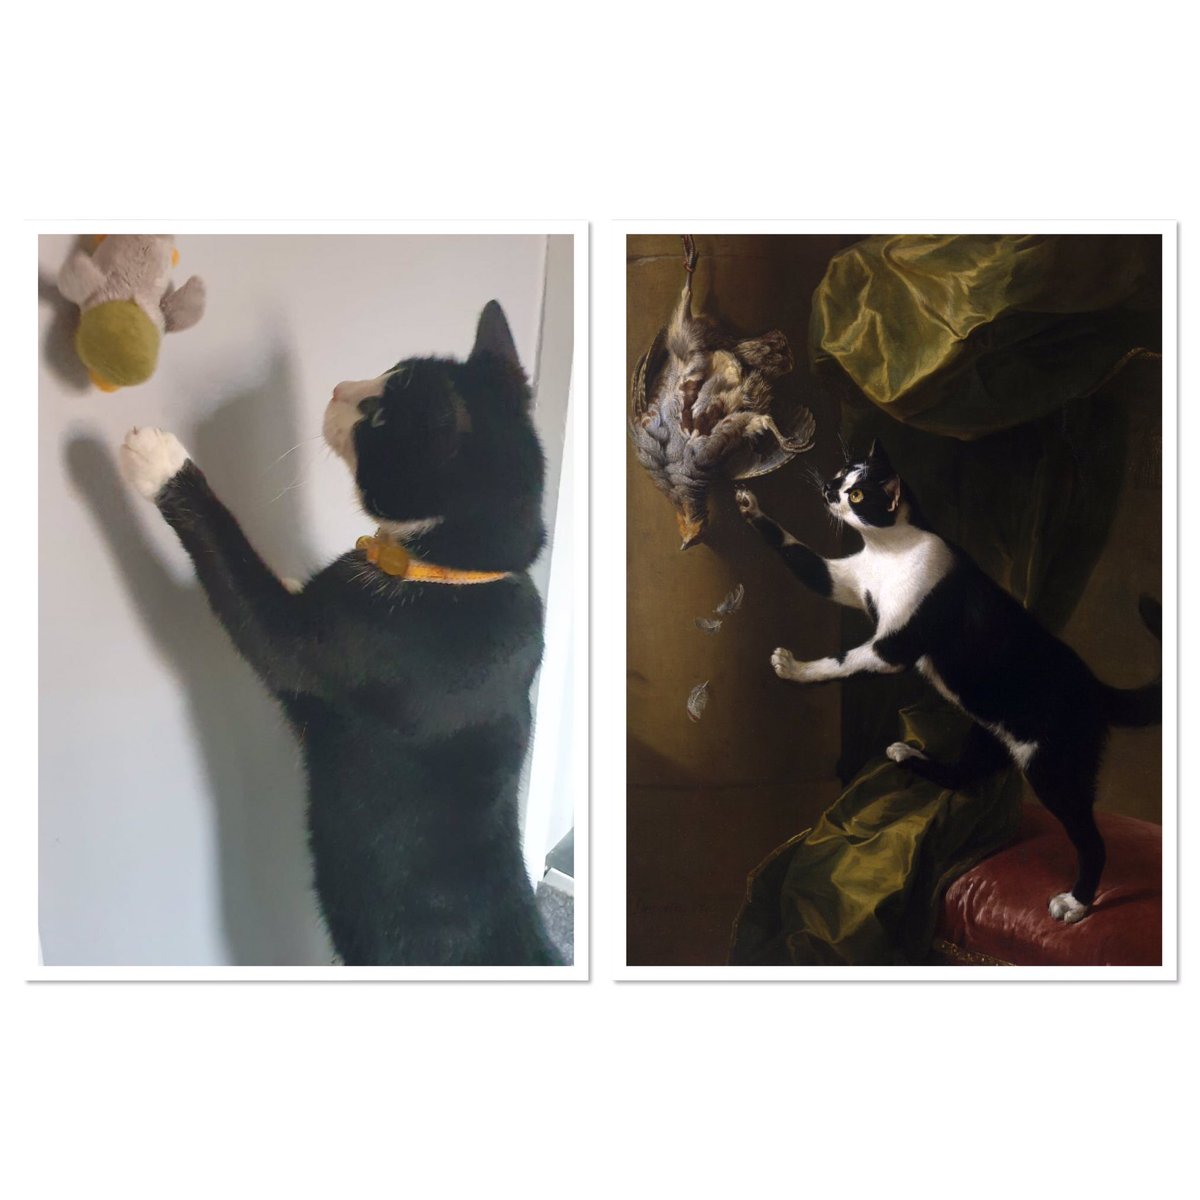 The lighting of ‘Cat with Game Bird’ by Desportes is faithfully recreated with the help of catnip and patience...  #MuseumWeek  #CultureinQuarentineMW